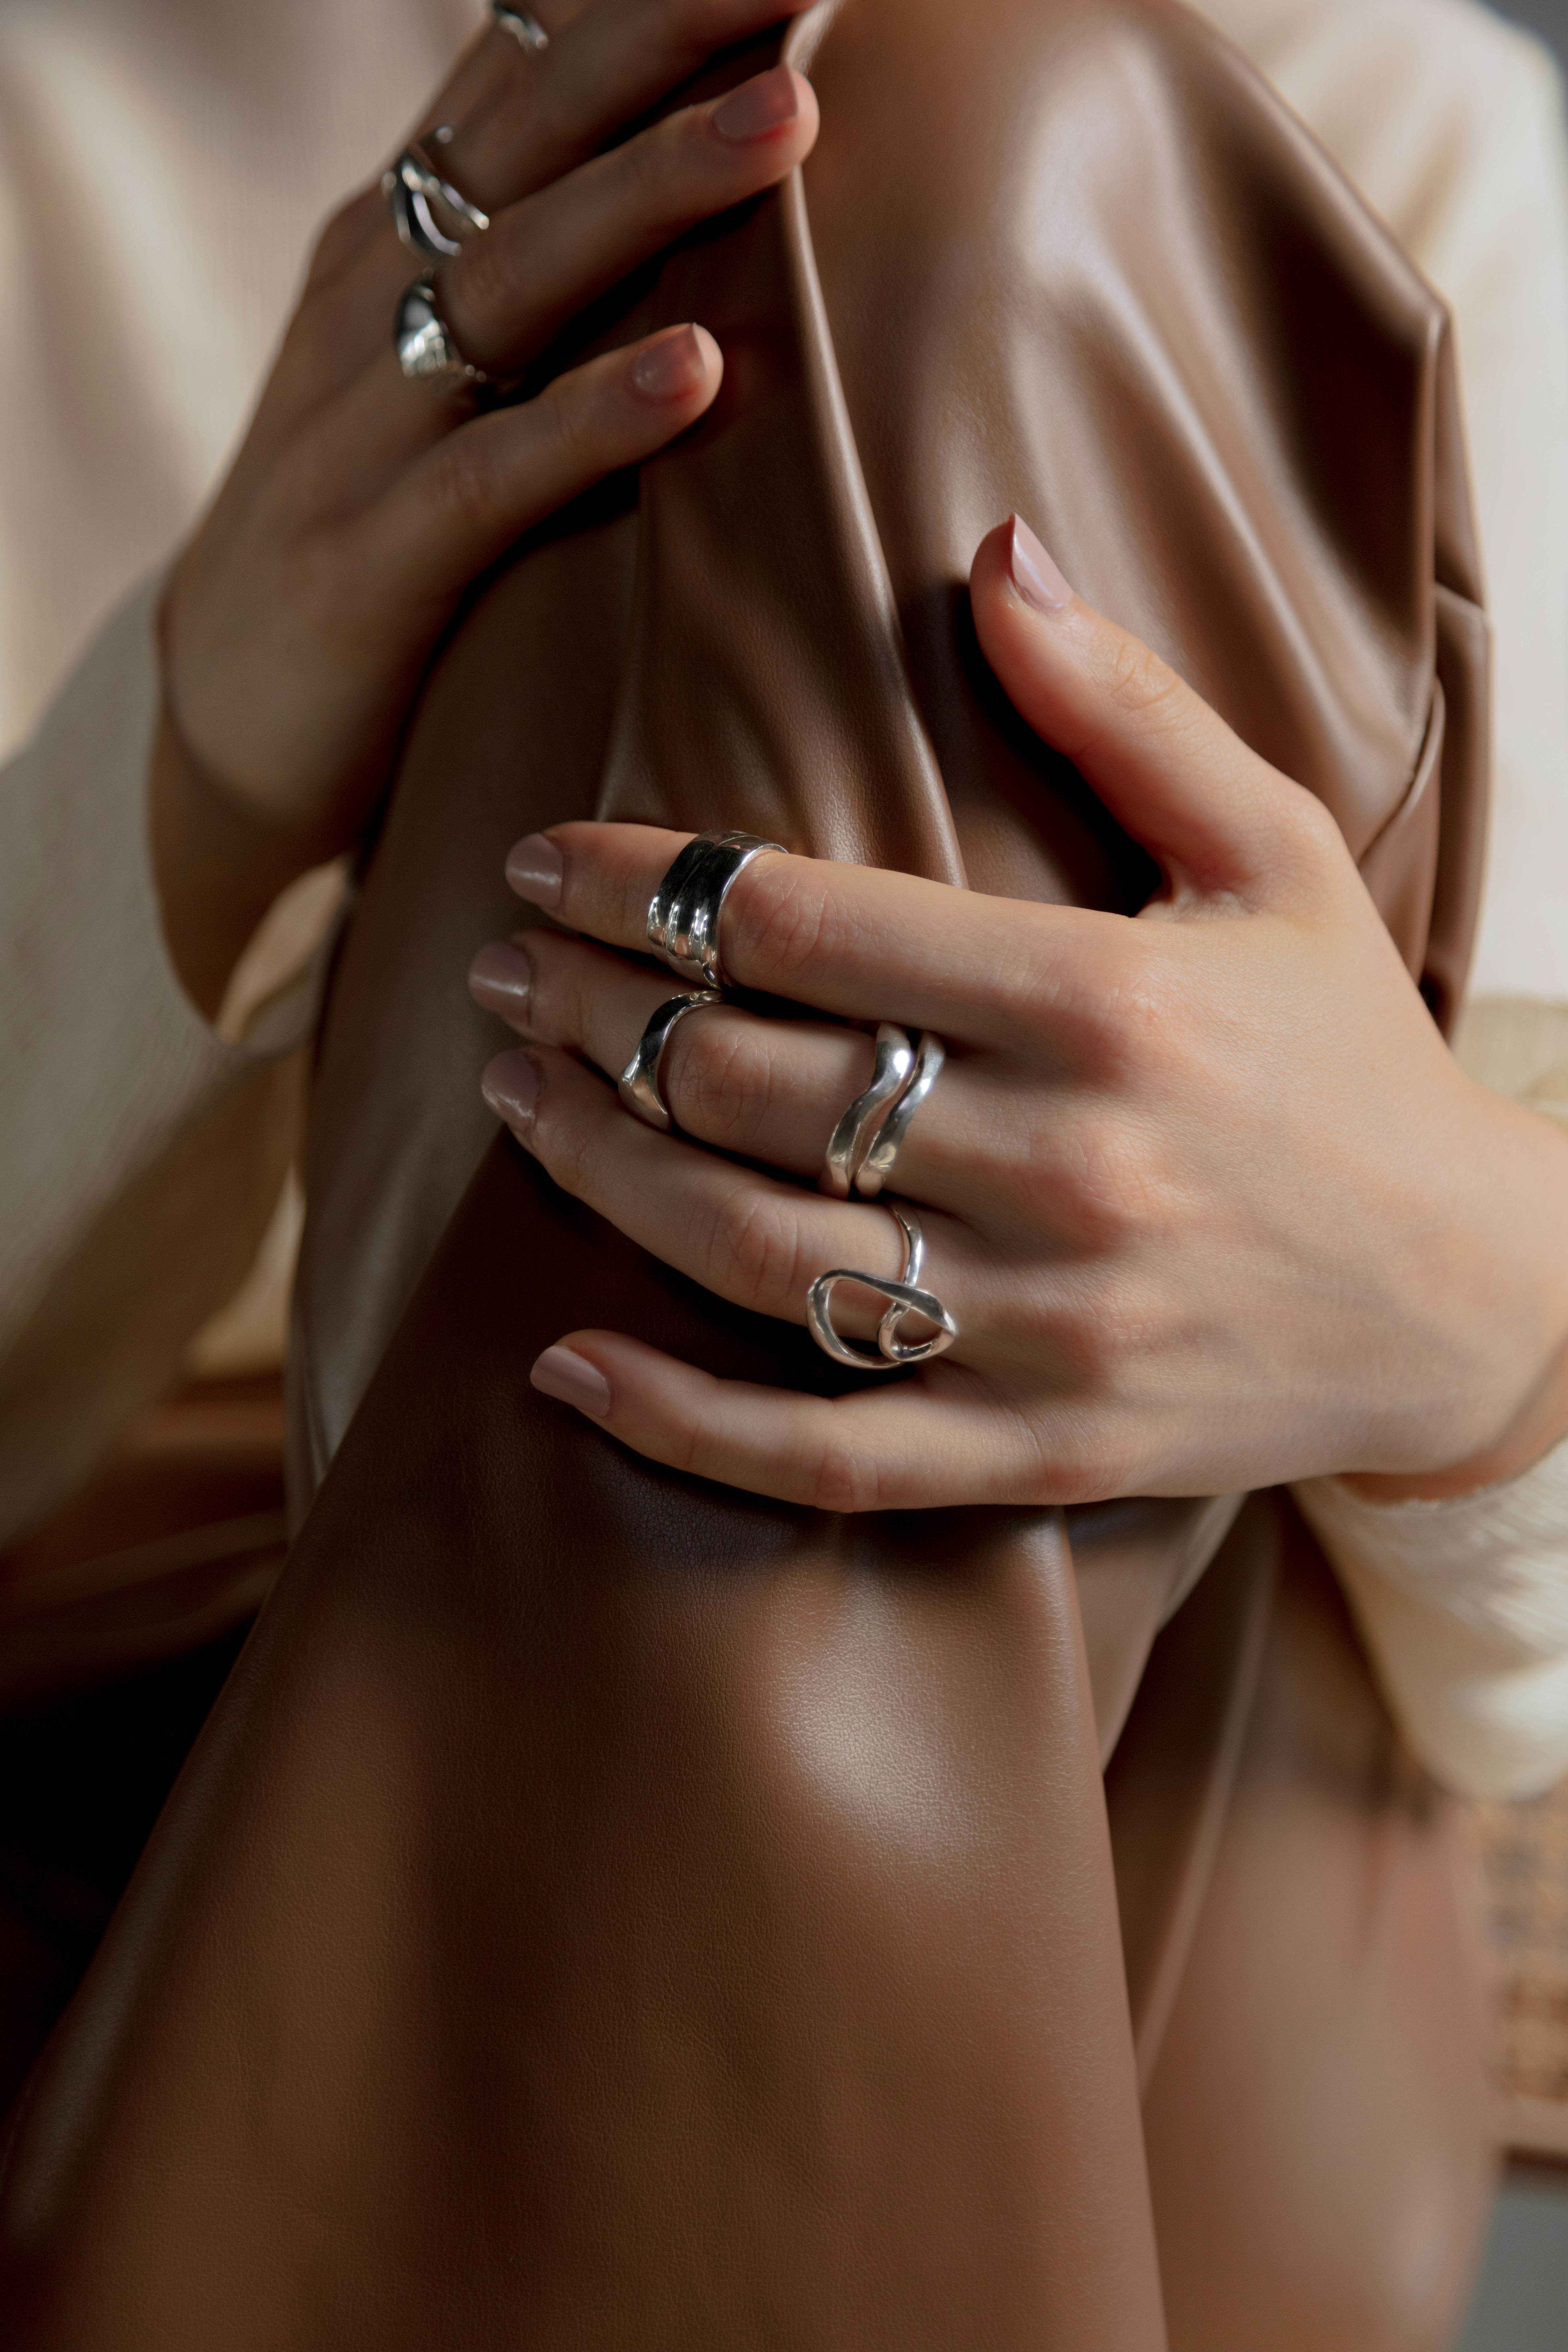 person wearing silver rings holding leather garment